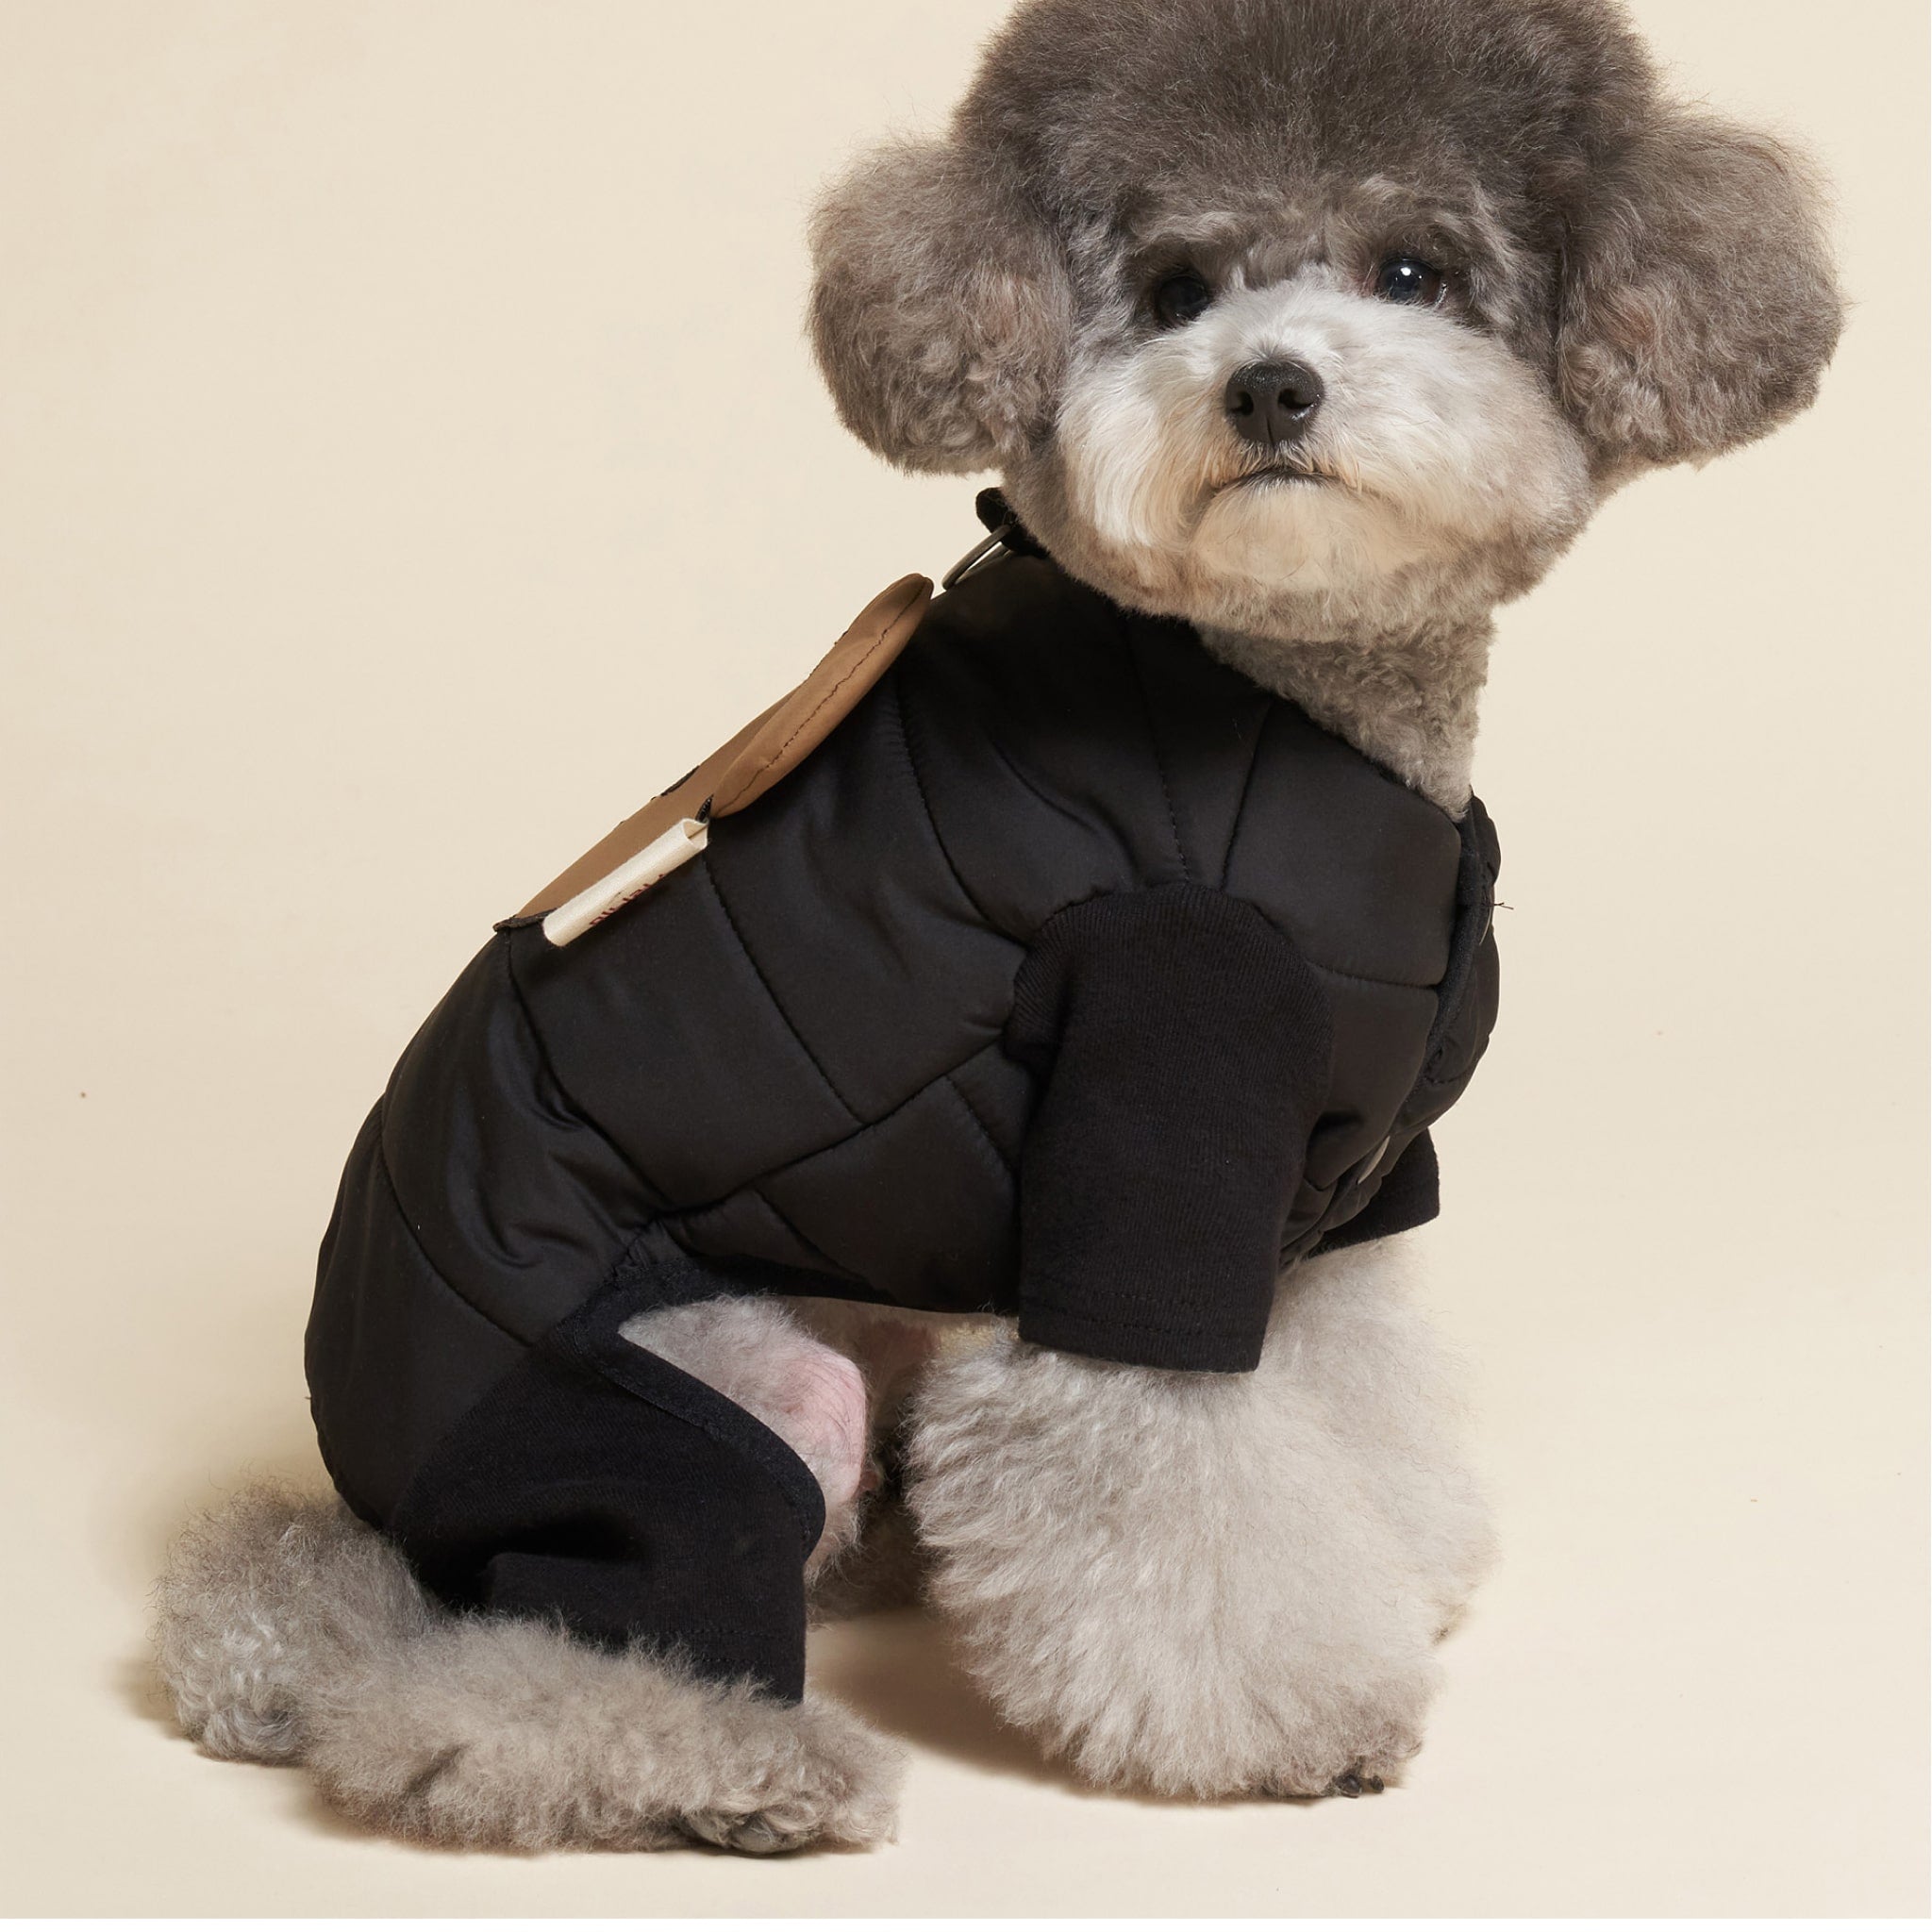 Dog wearing black padded bear jumpsuit while sitting side view